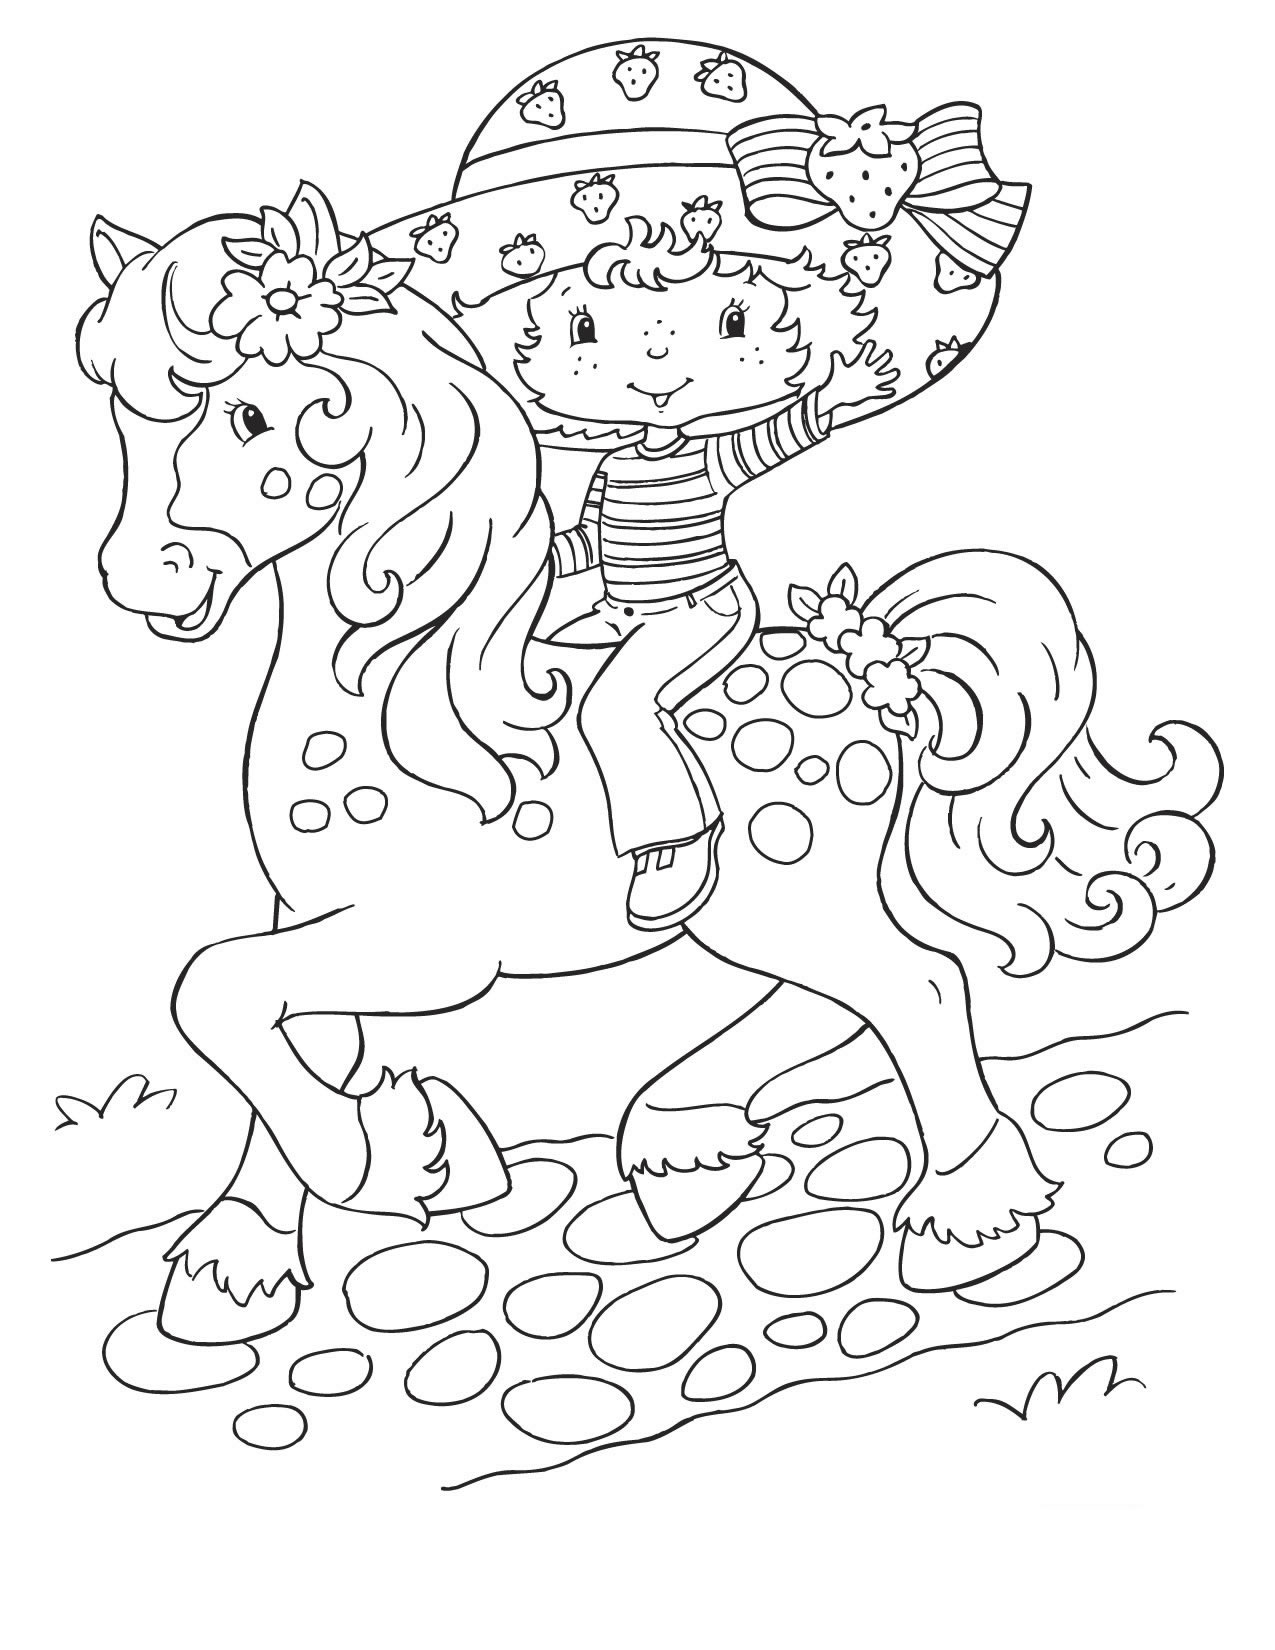 Strawberry Shortcake coloring pages for kids to print Strawberry